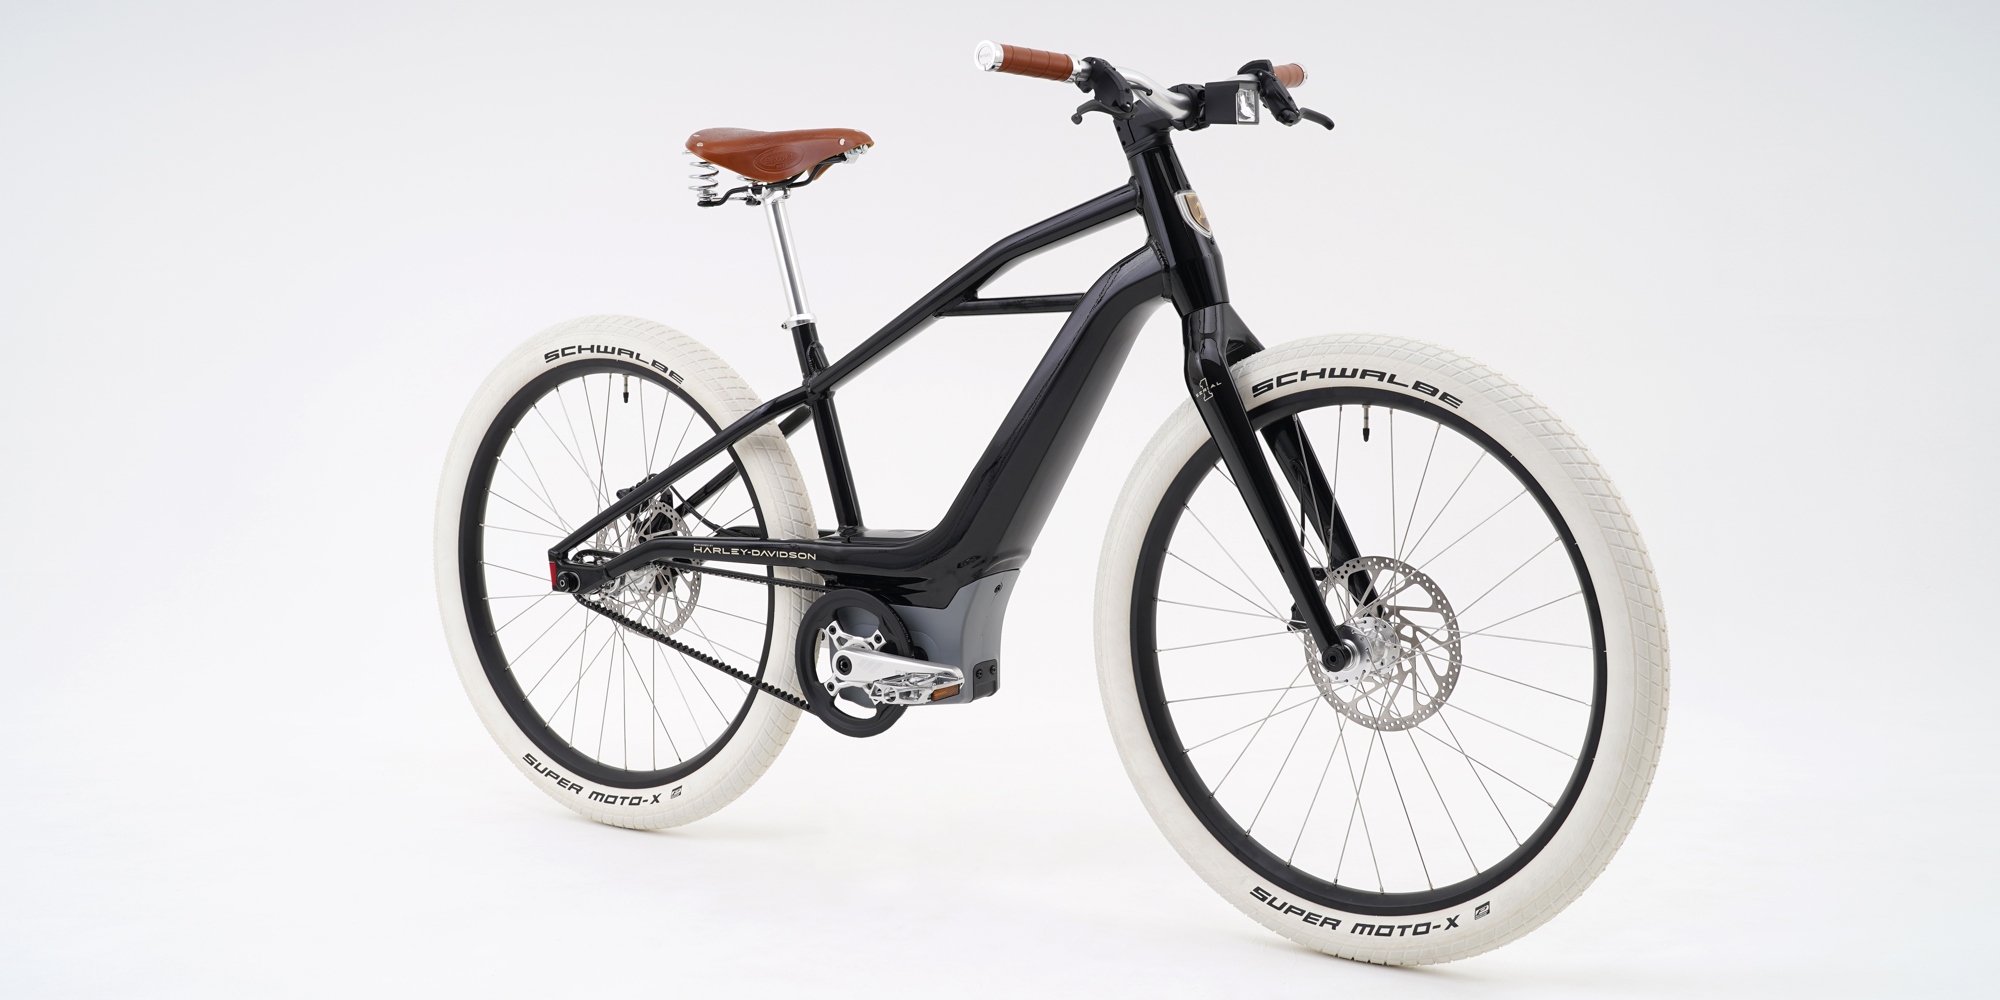 Harley-Davidsons limited edition electric bicycle nearly sold out in 6 days